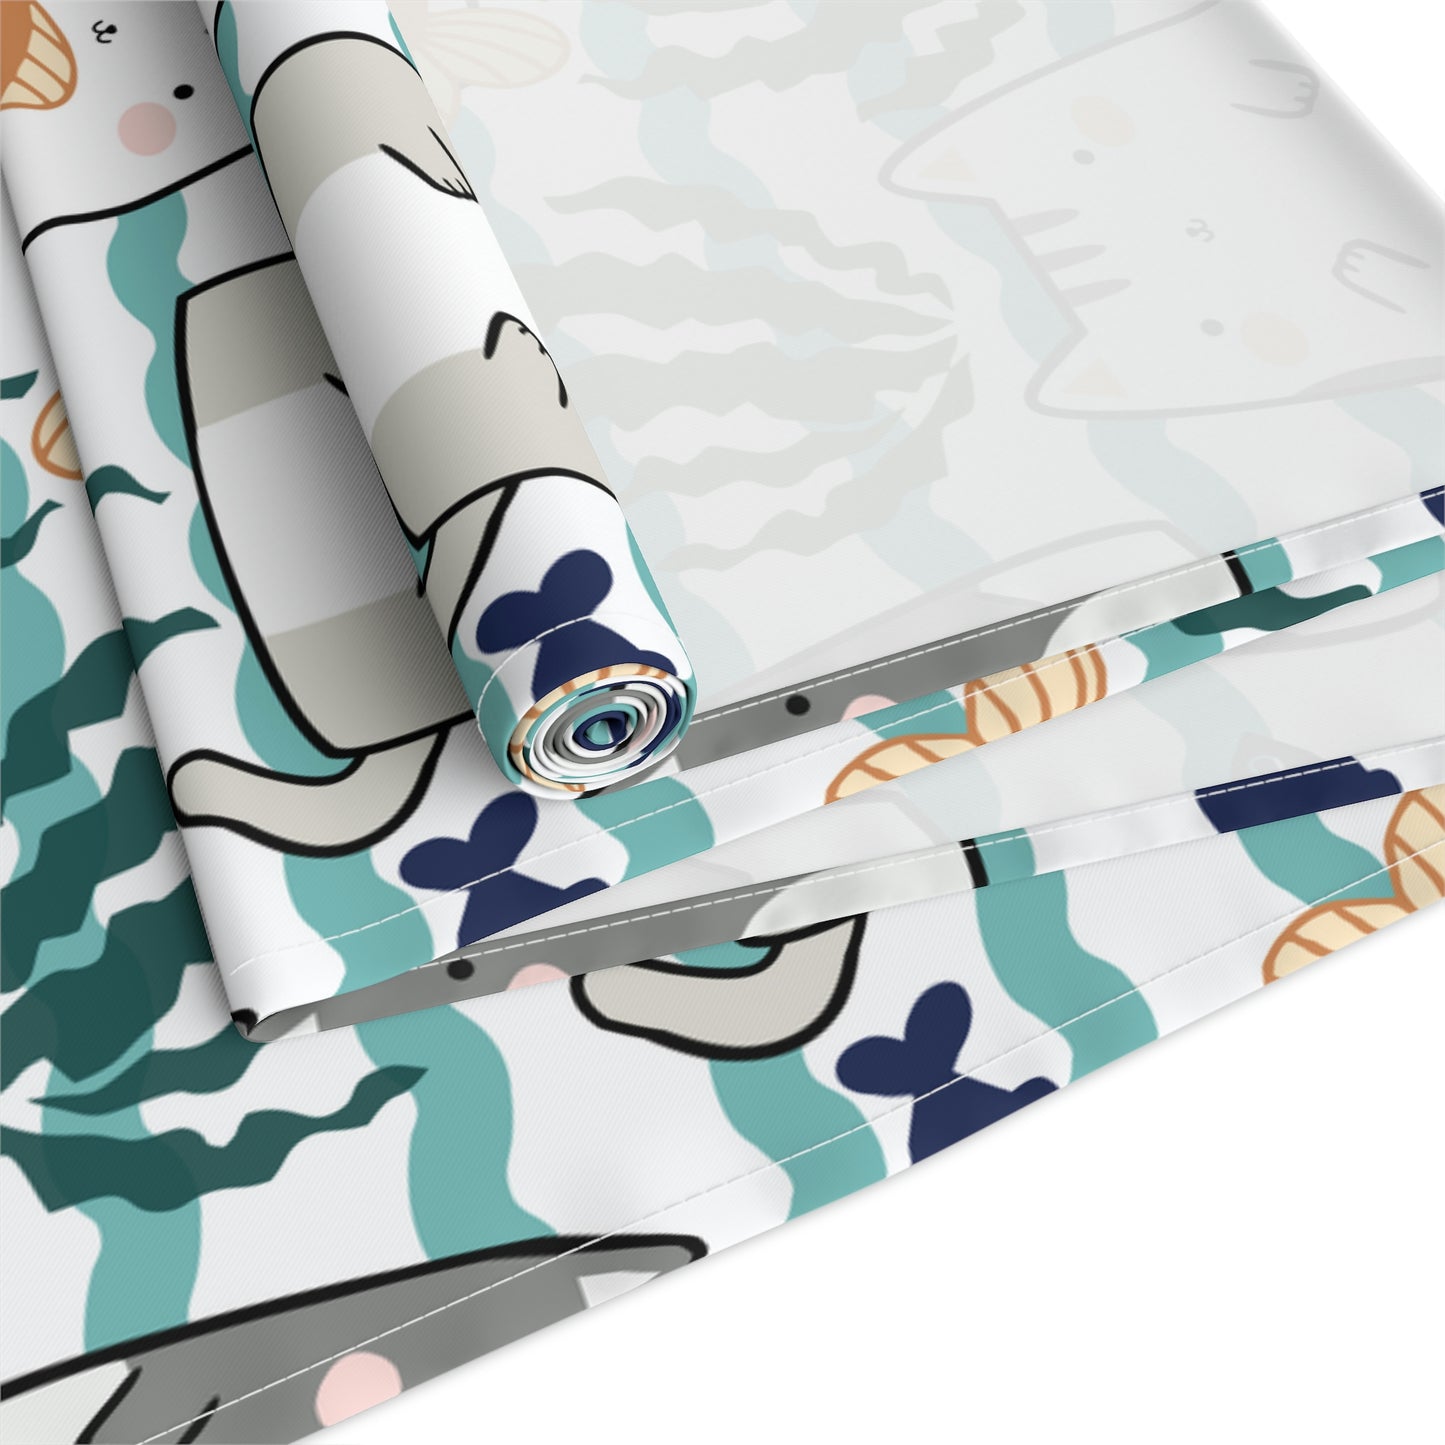 Kawaii Cats and Fishes Table Runner (Cotton, Poly)